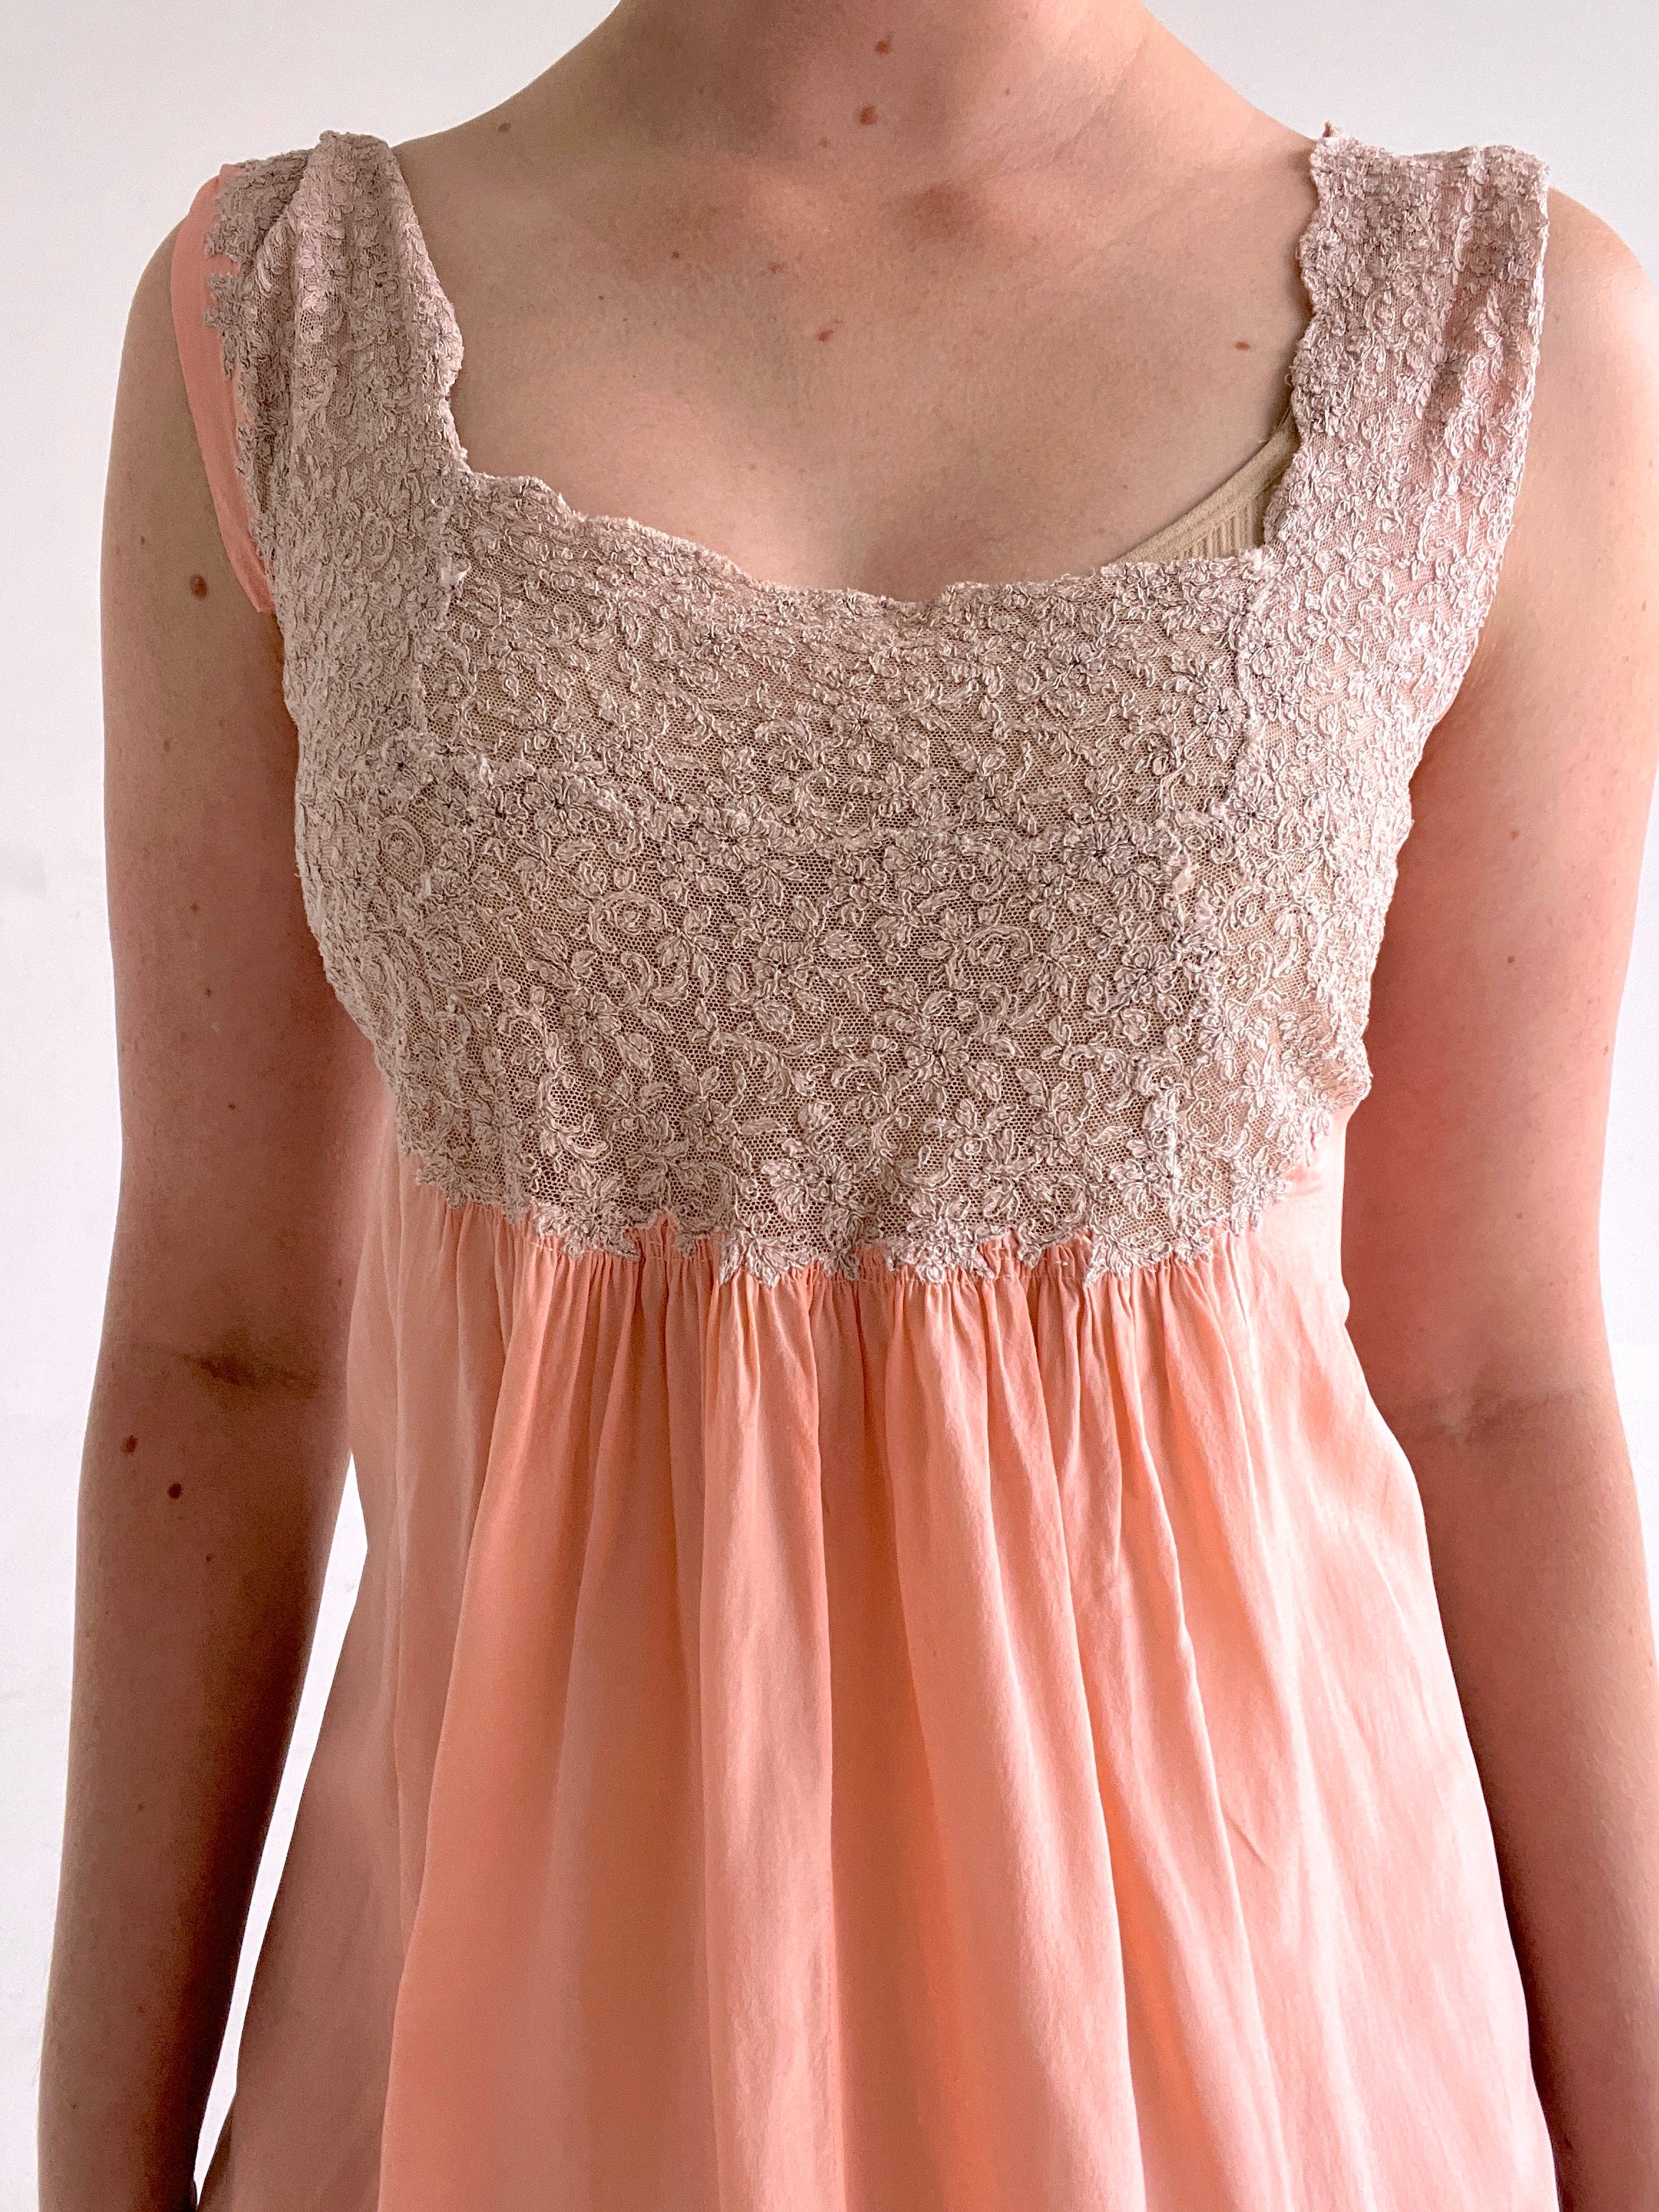 1930's Peach Silk Gown with Train and Cream Lace